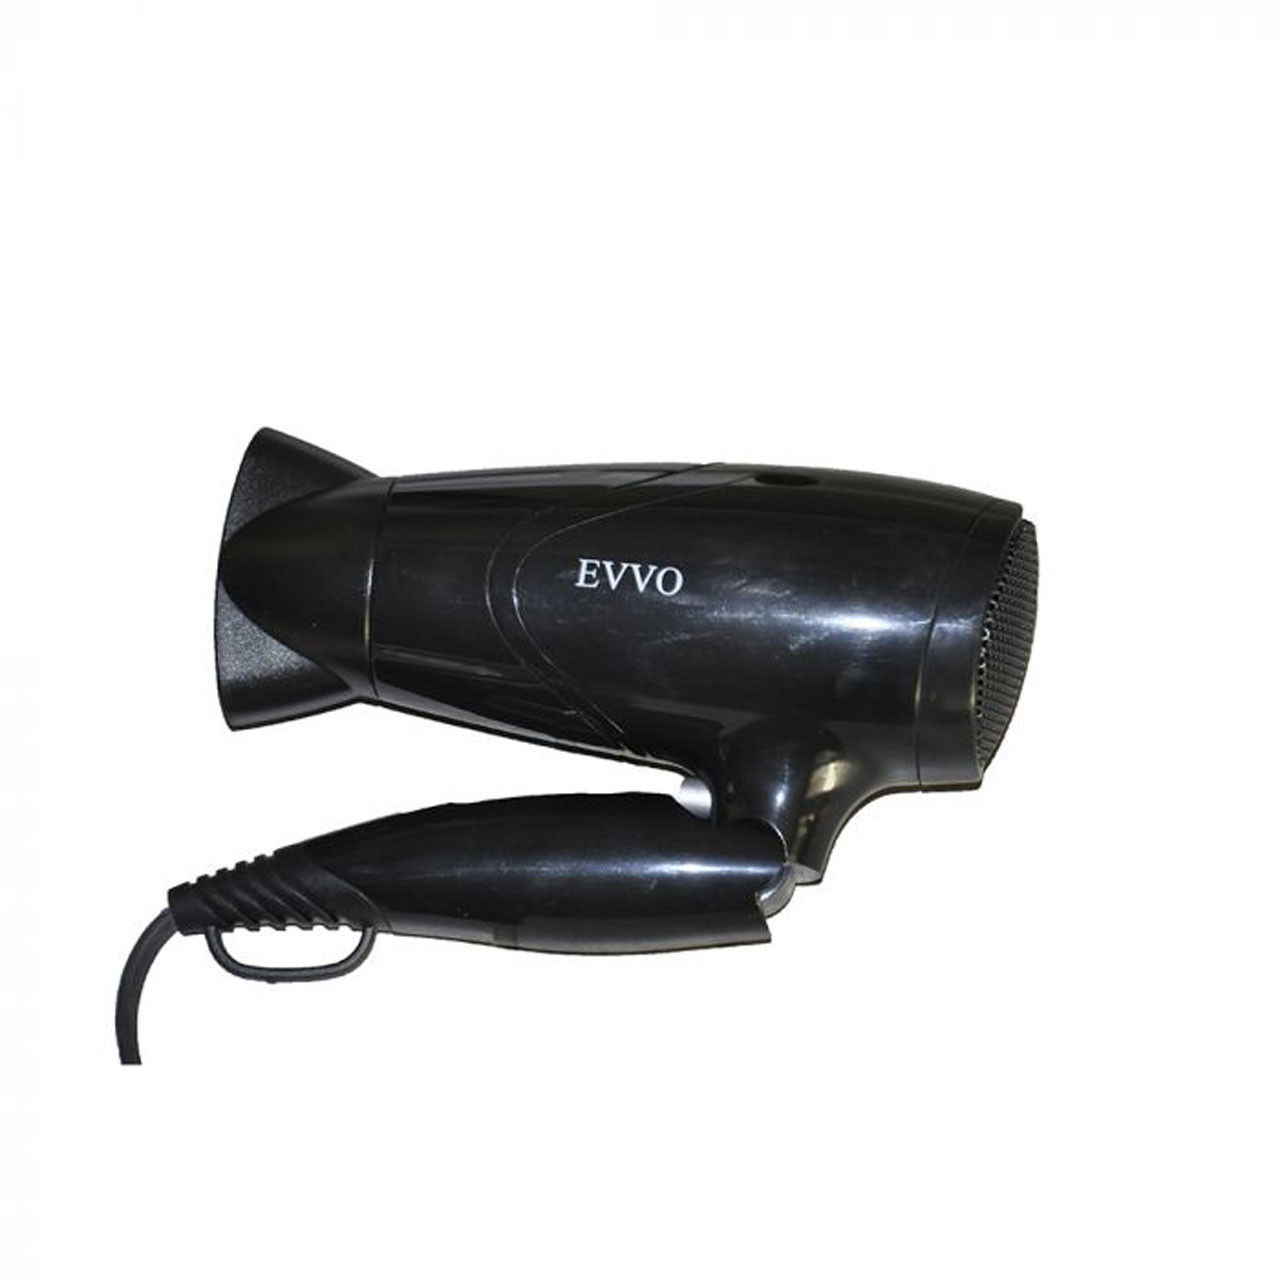 How powerful is the motor of the foldable hair dryer?